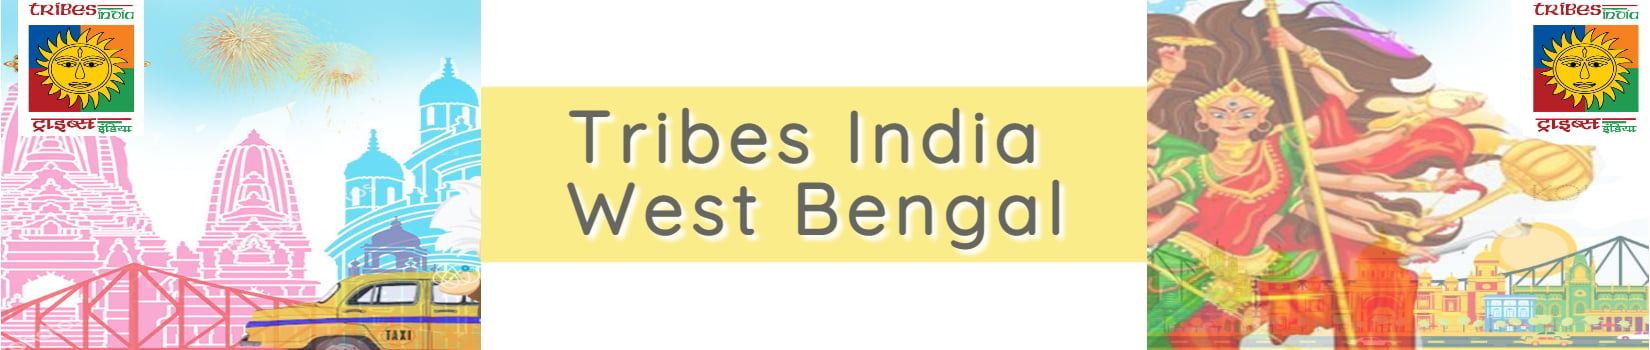 Tribes India West Bengal